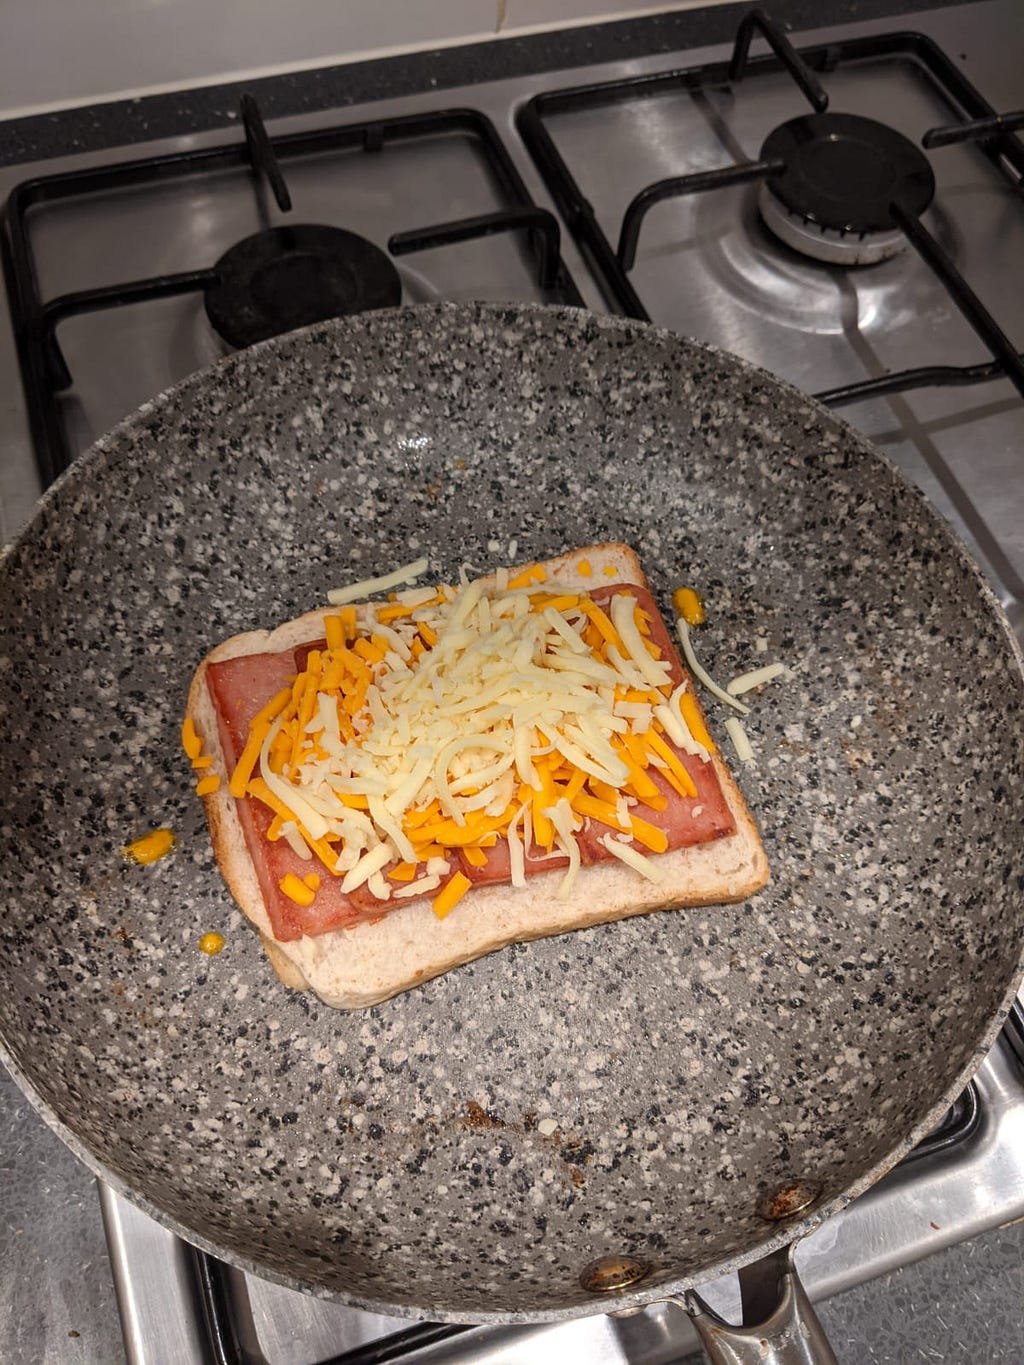 A spam and cheese toastie being cooked in a pan on a hob.